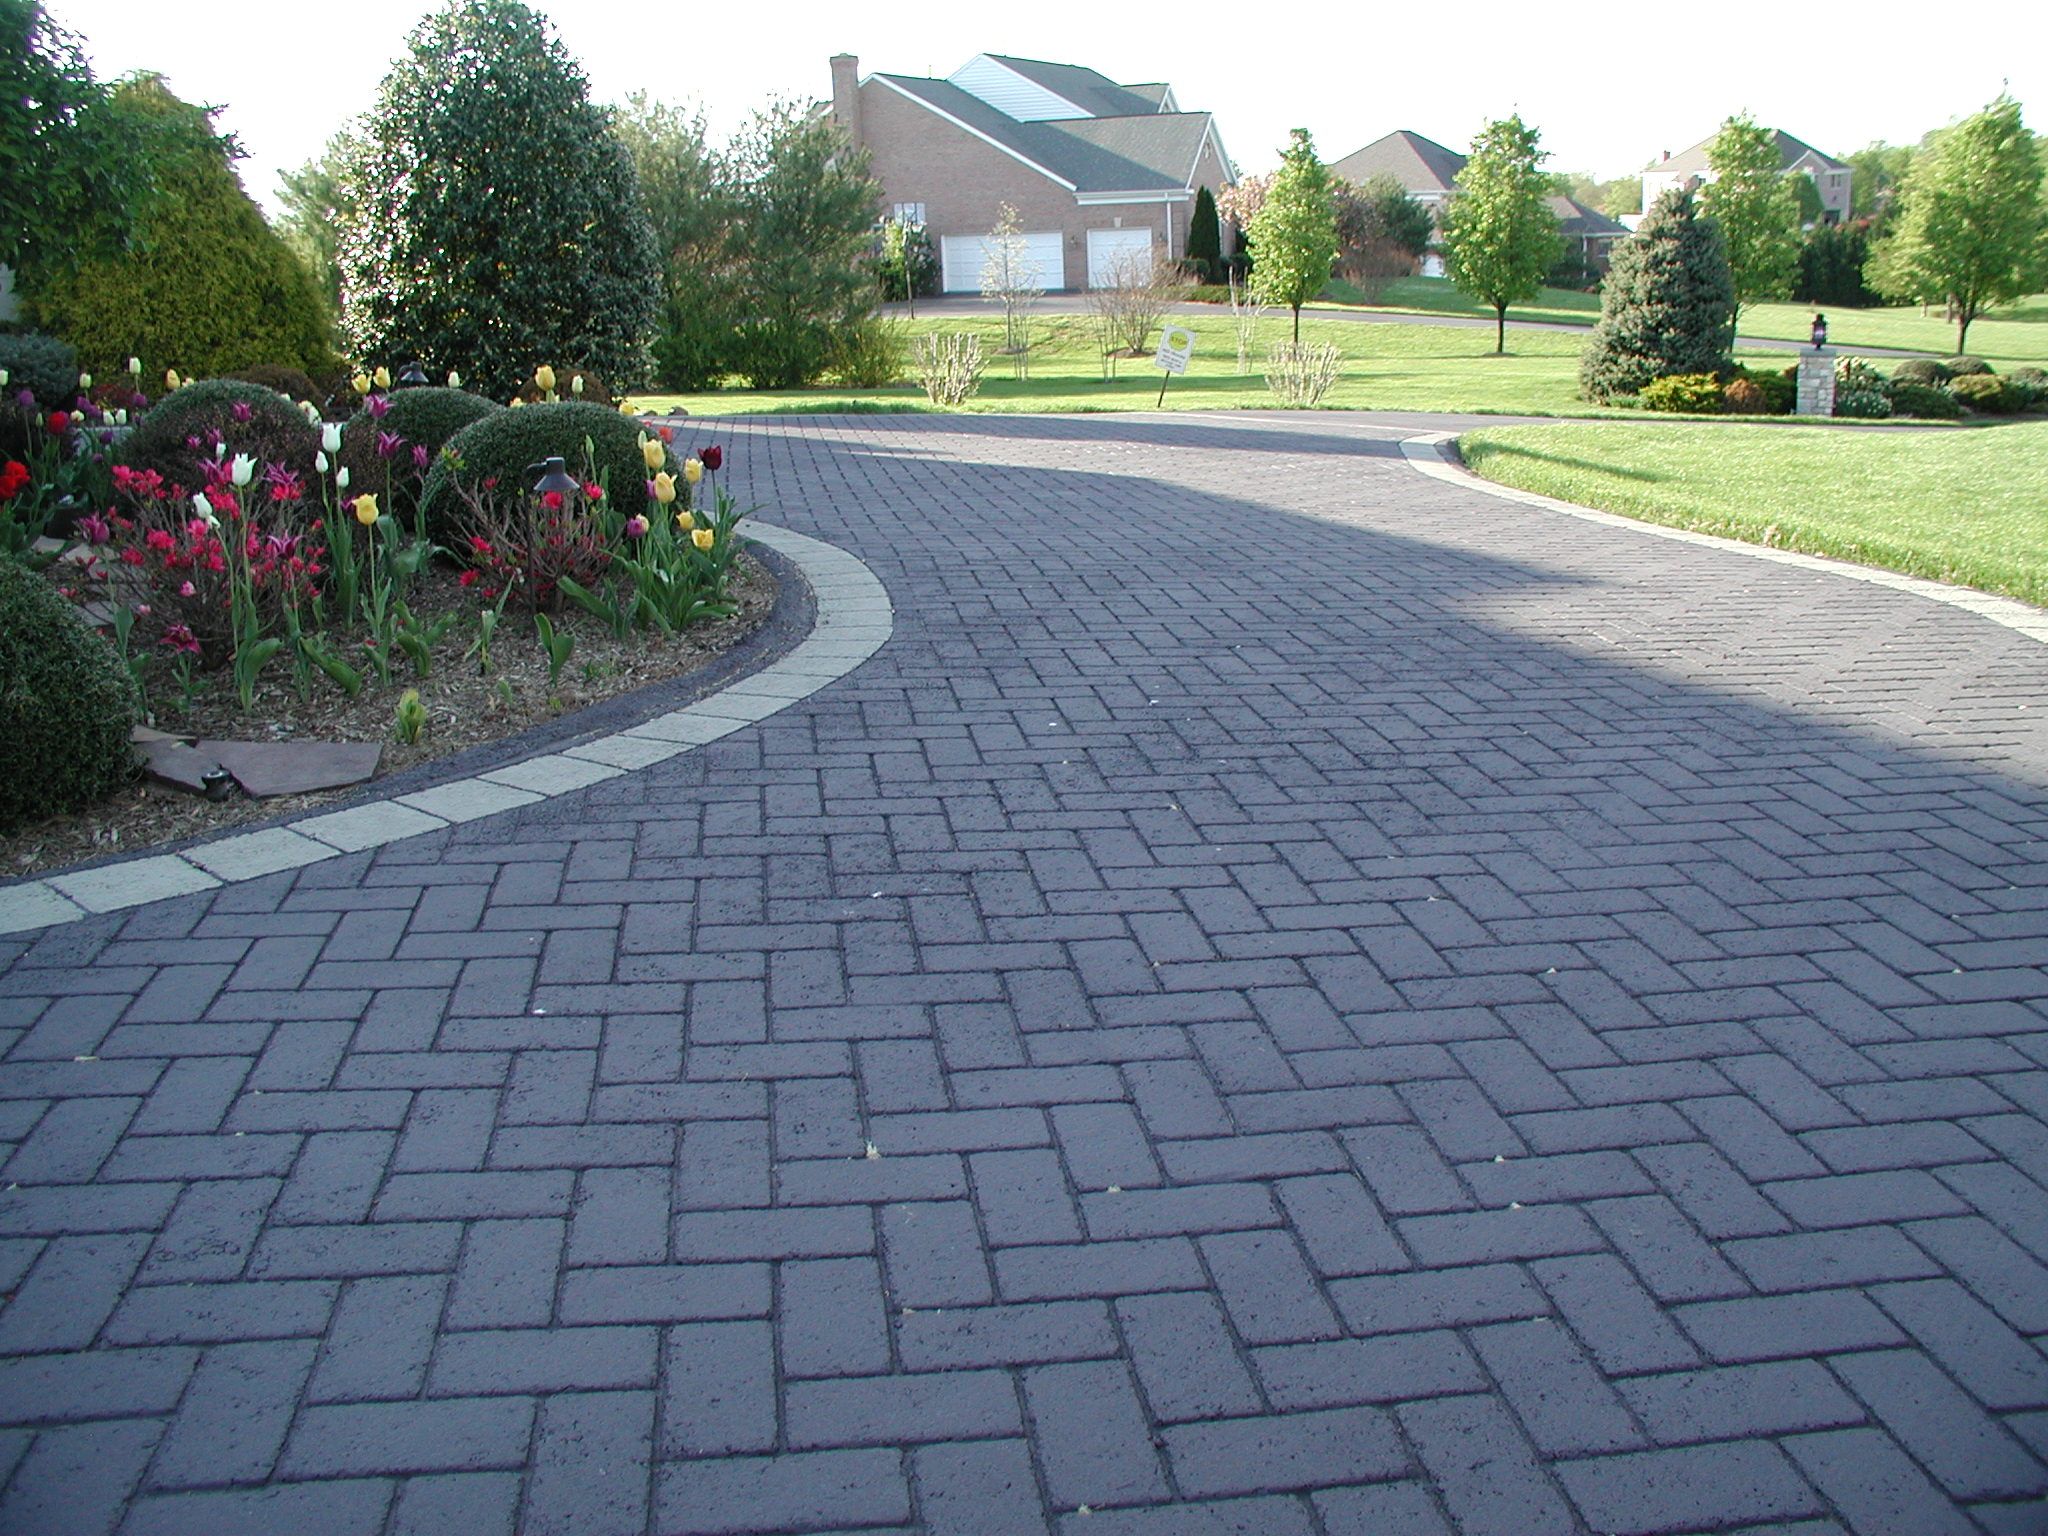 How to Remove Gas & Oil Stains From an Asphalt Driveway